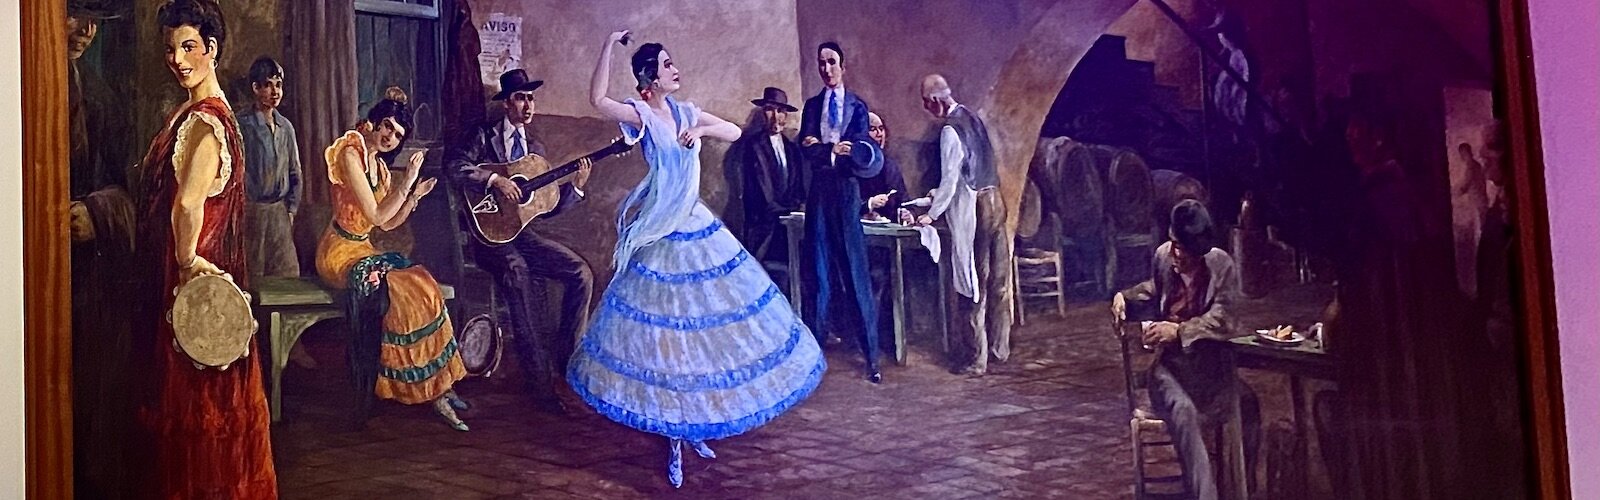 On display at the Tampa Bay History Center are oil paintings depicting Tampa’s Spanish-Cuban immigrant culture that once lined the walls of the former Valencia Gardens Restaurant.